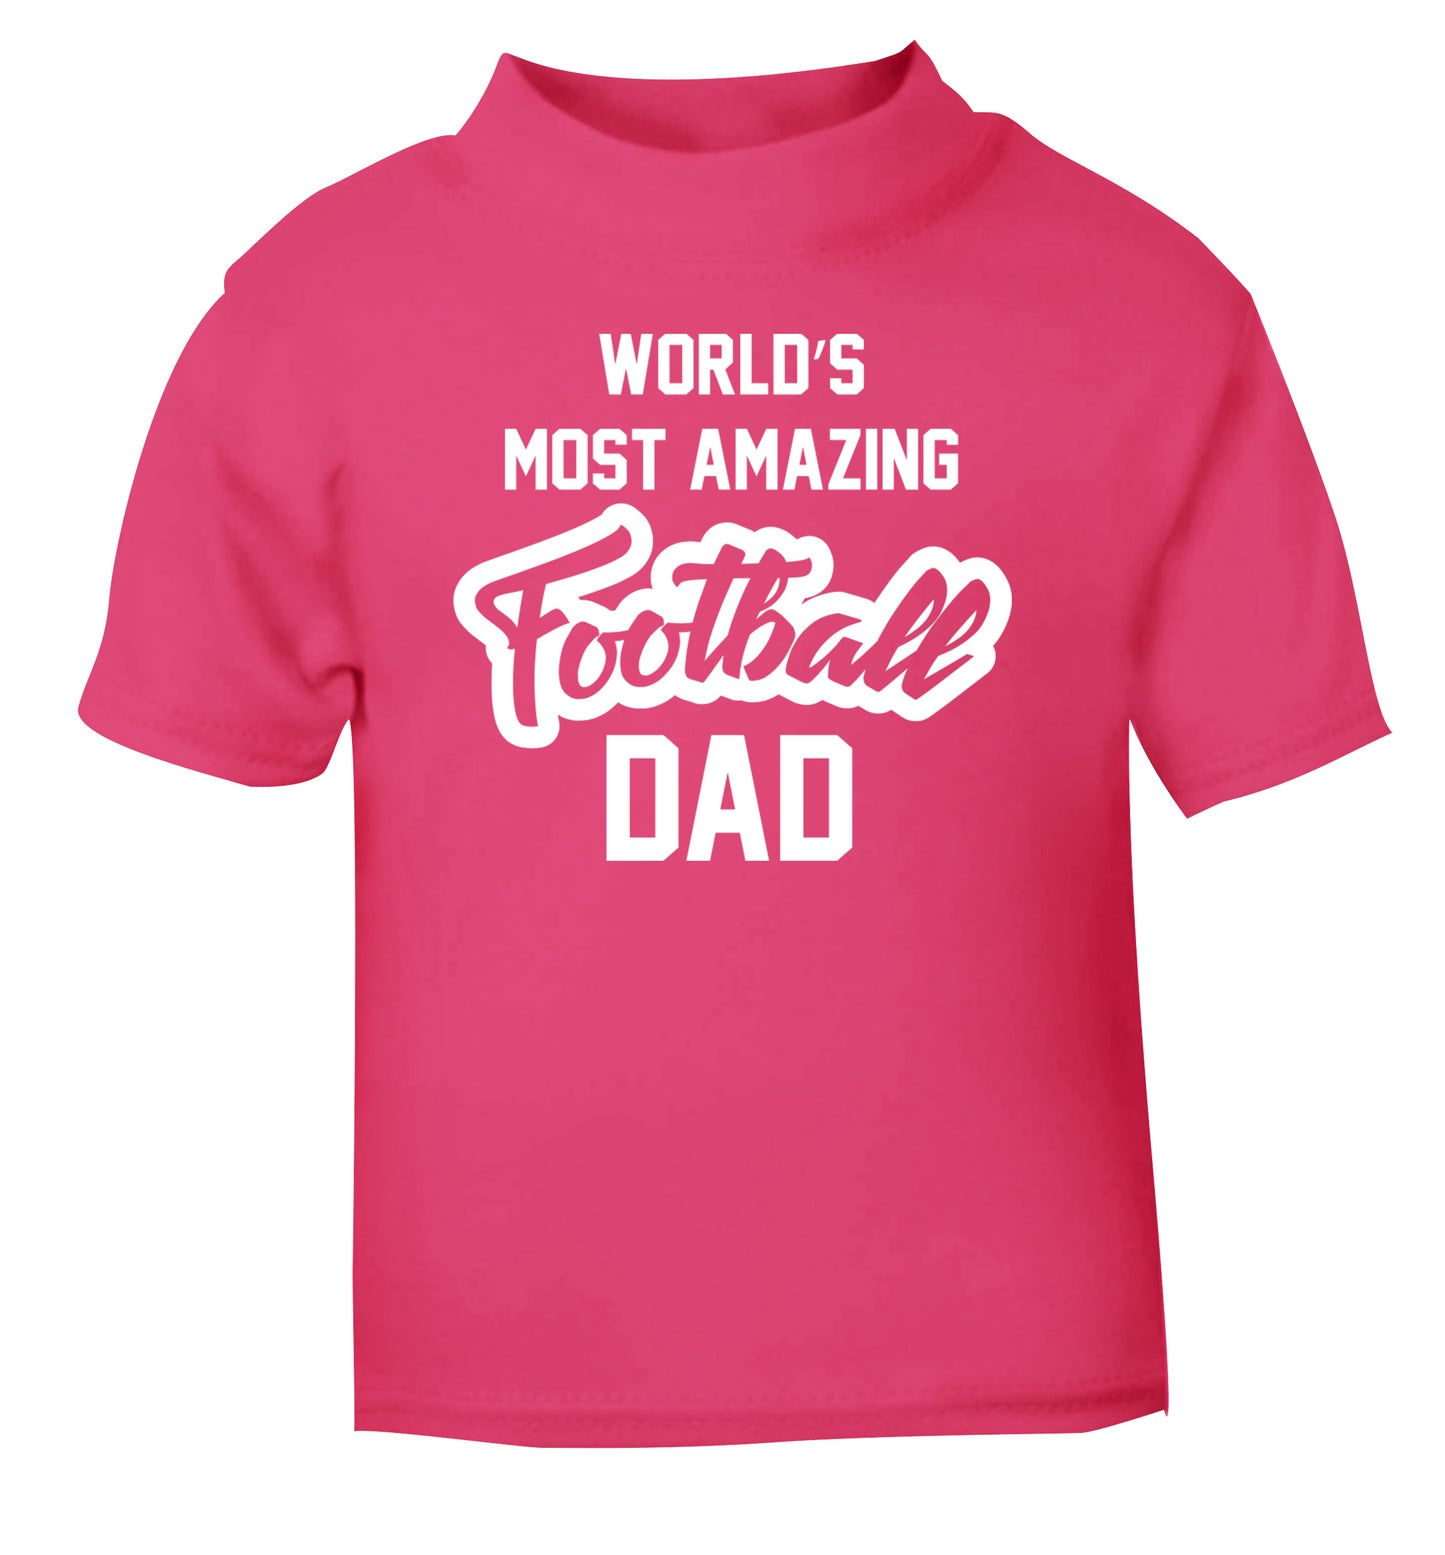 Worlds most amazing football dad pink Baby Toddler Tshirt 2 Years